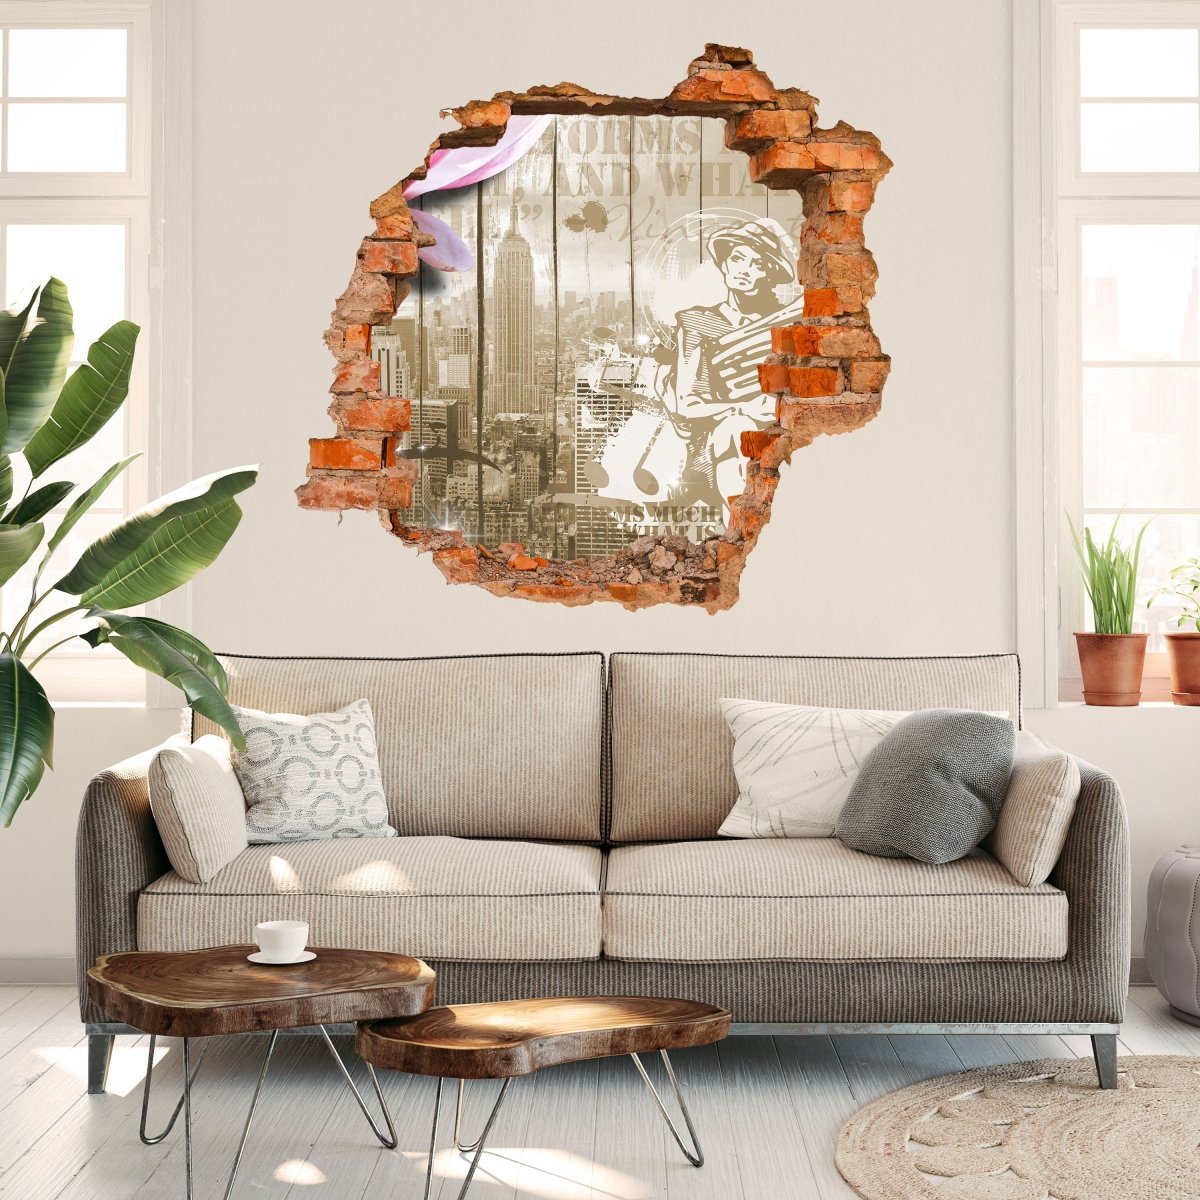 Music Vintage Blossoms New York 3D Wall Sticker - Wall Decal M0548